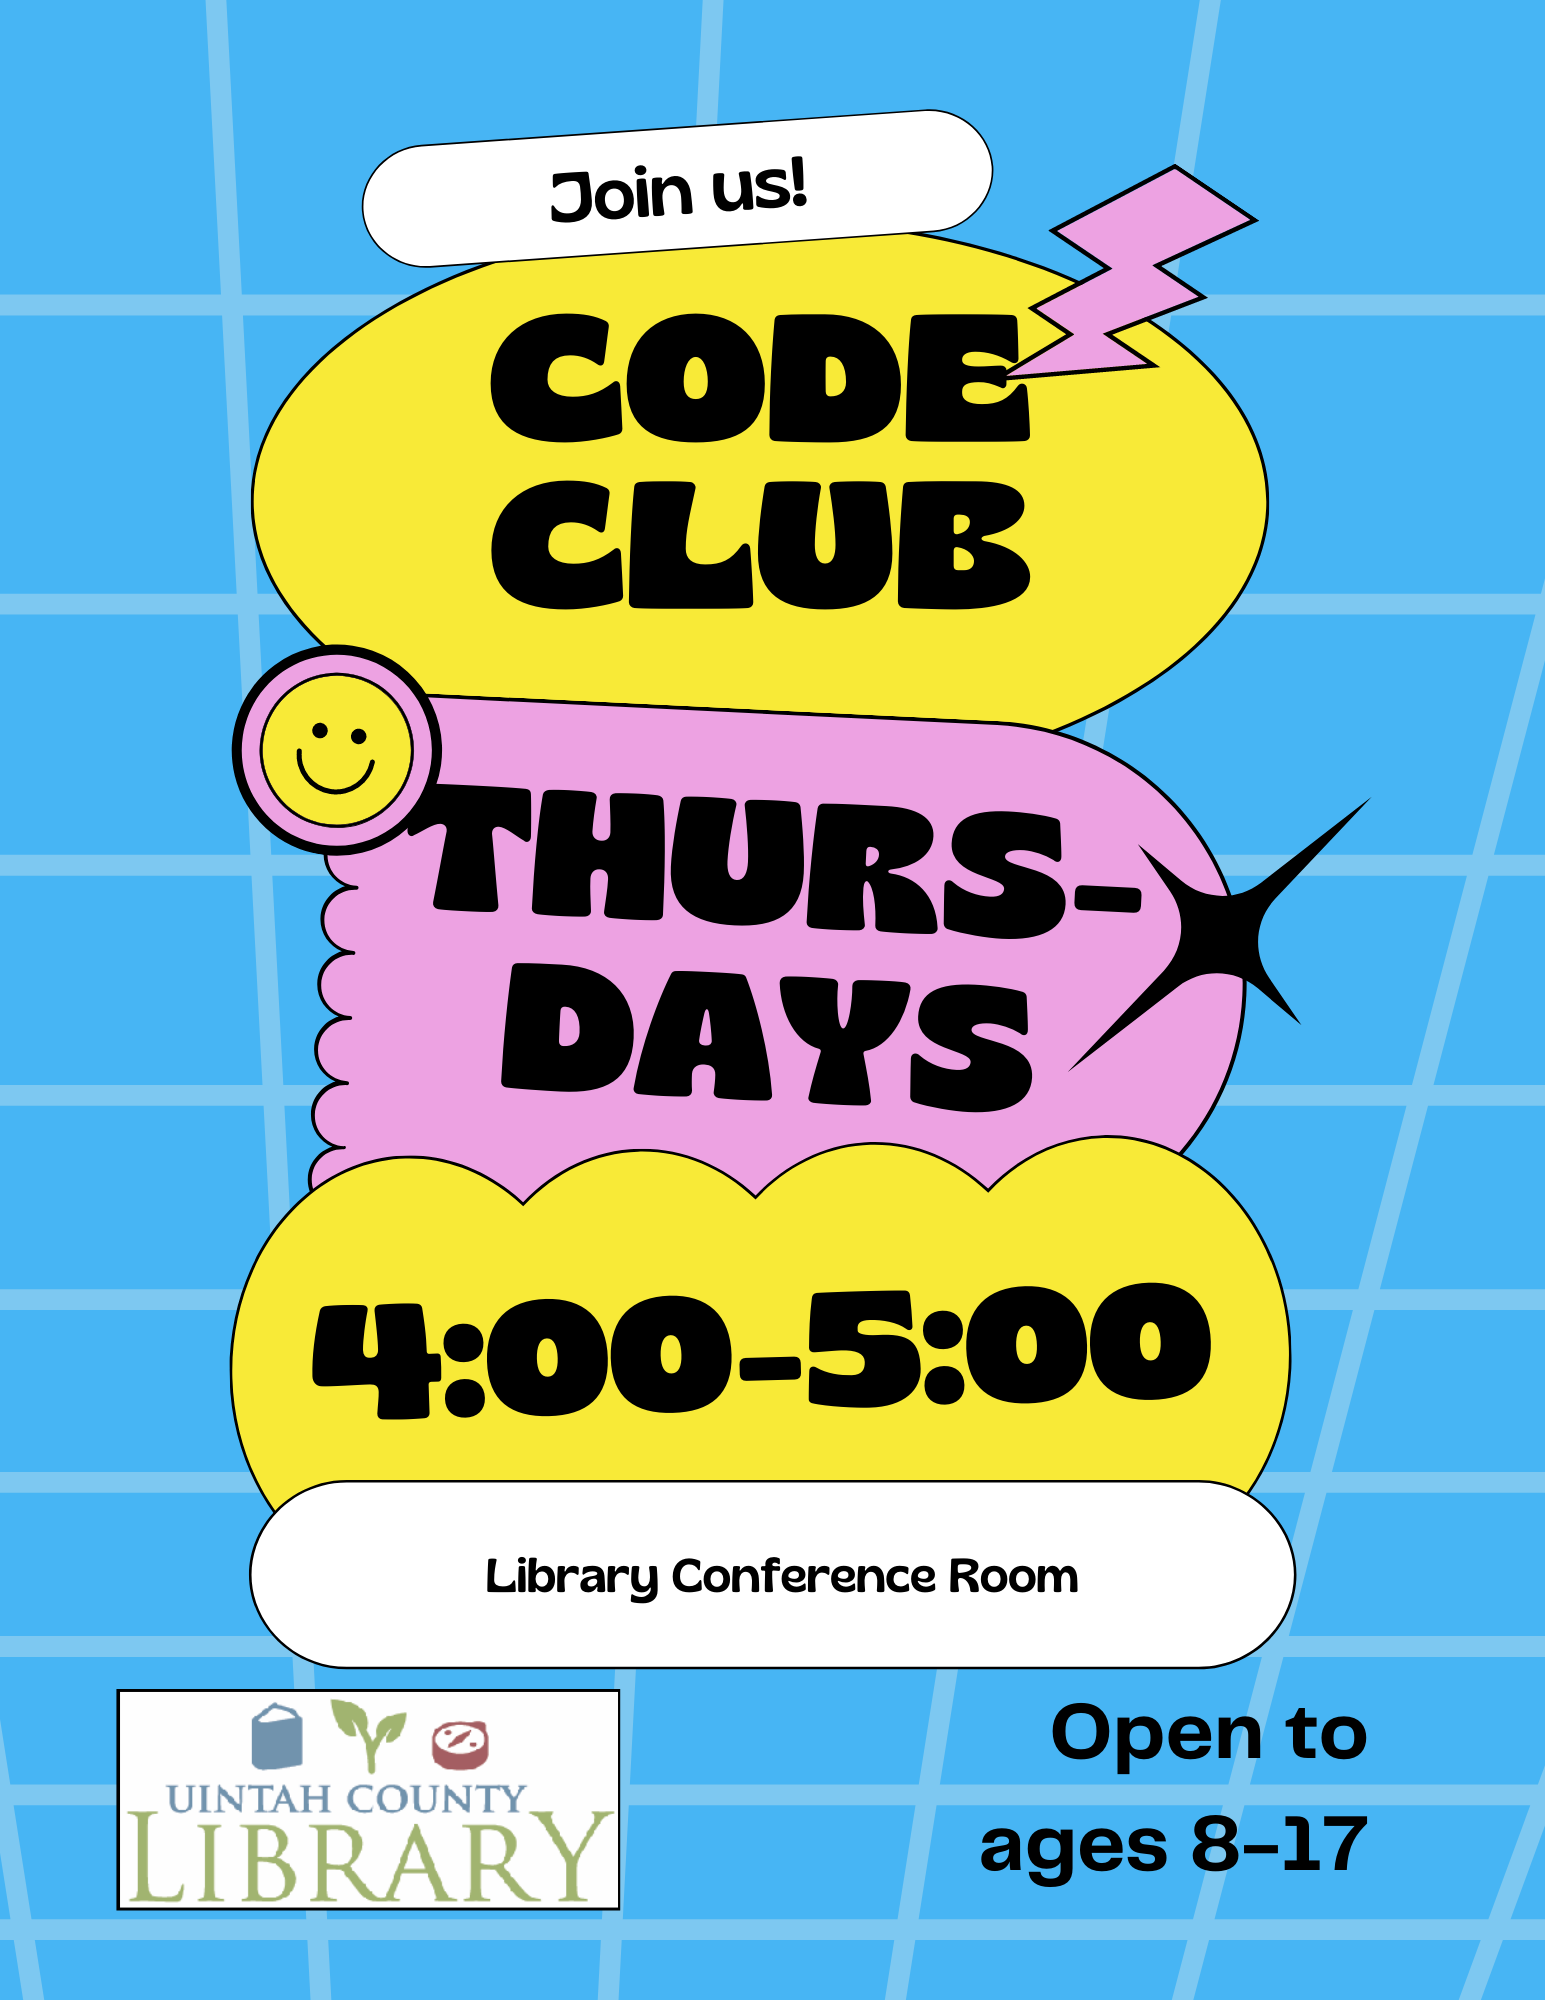 Library Code Club